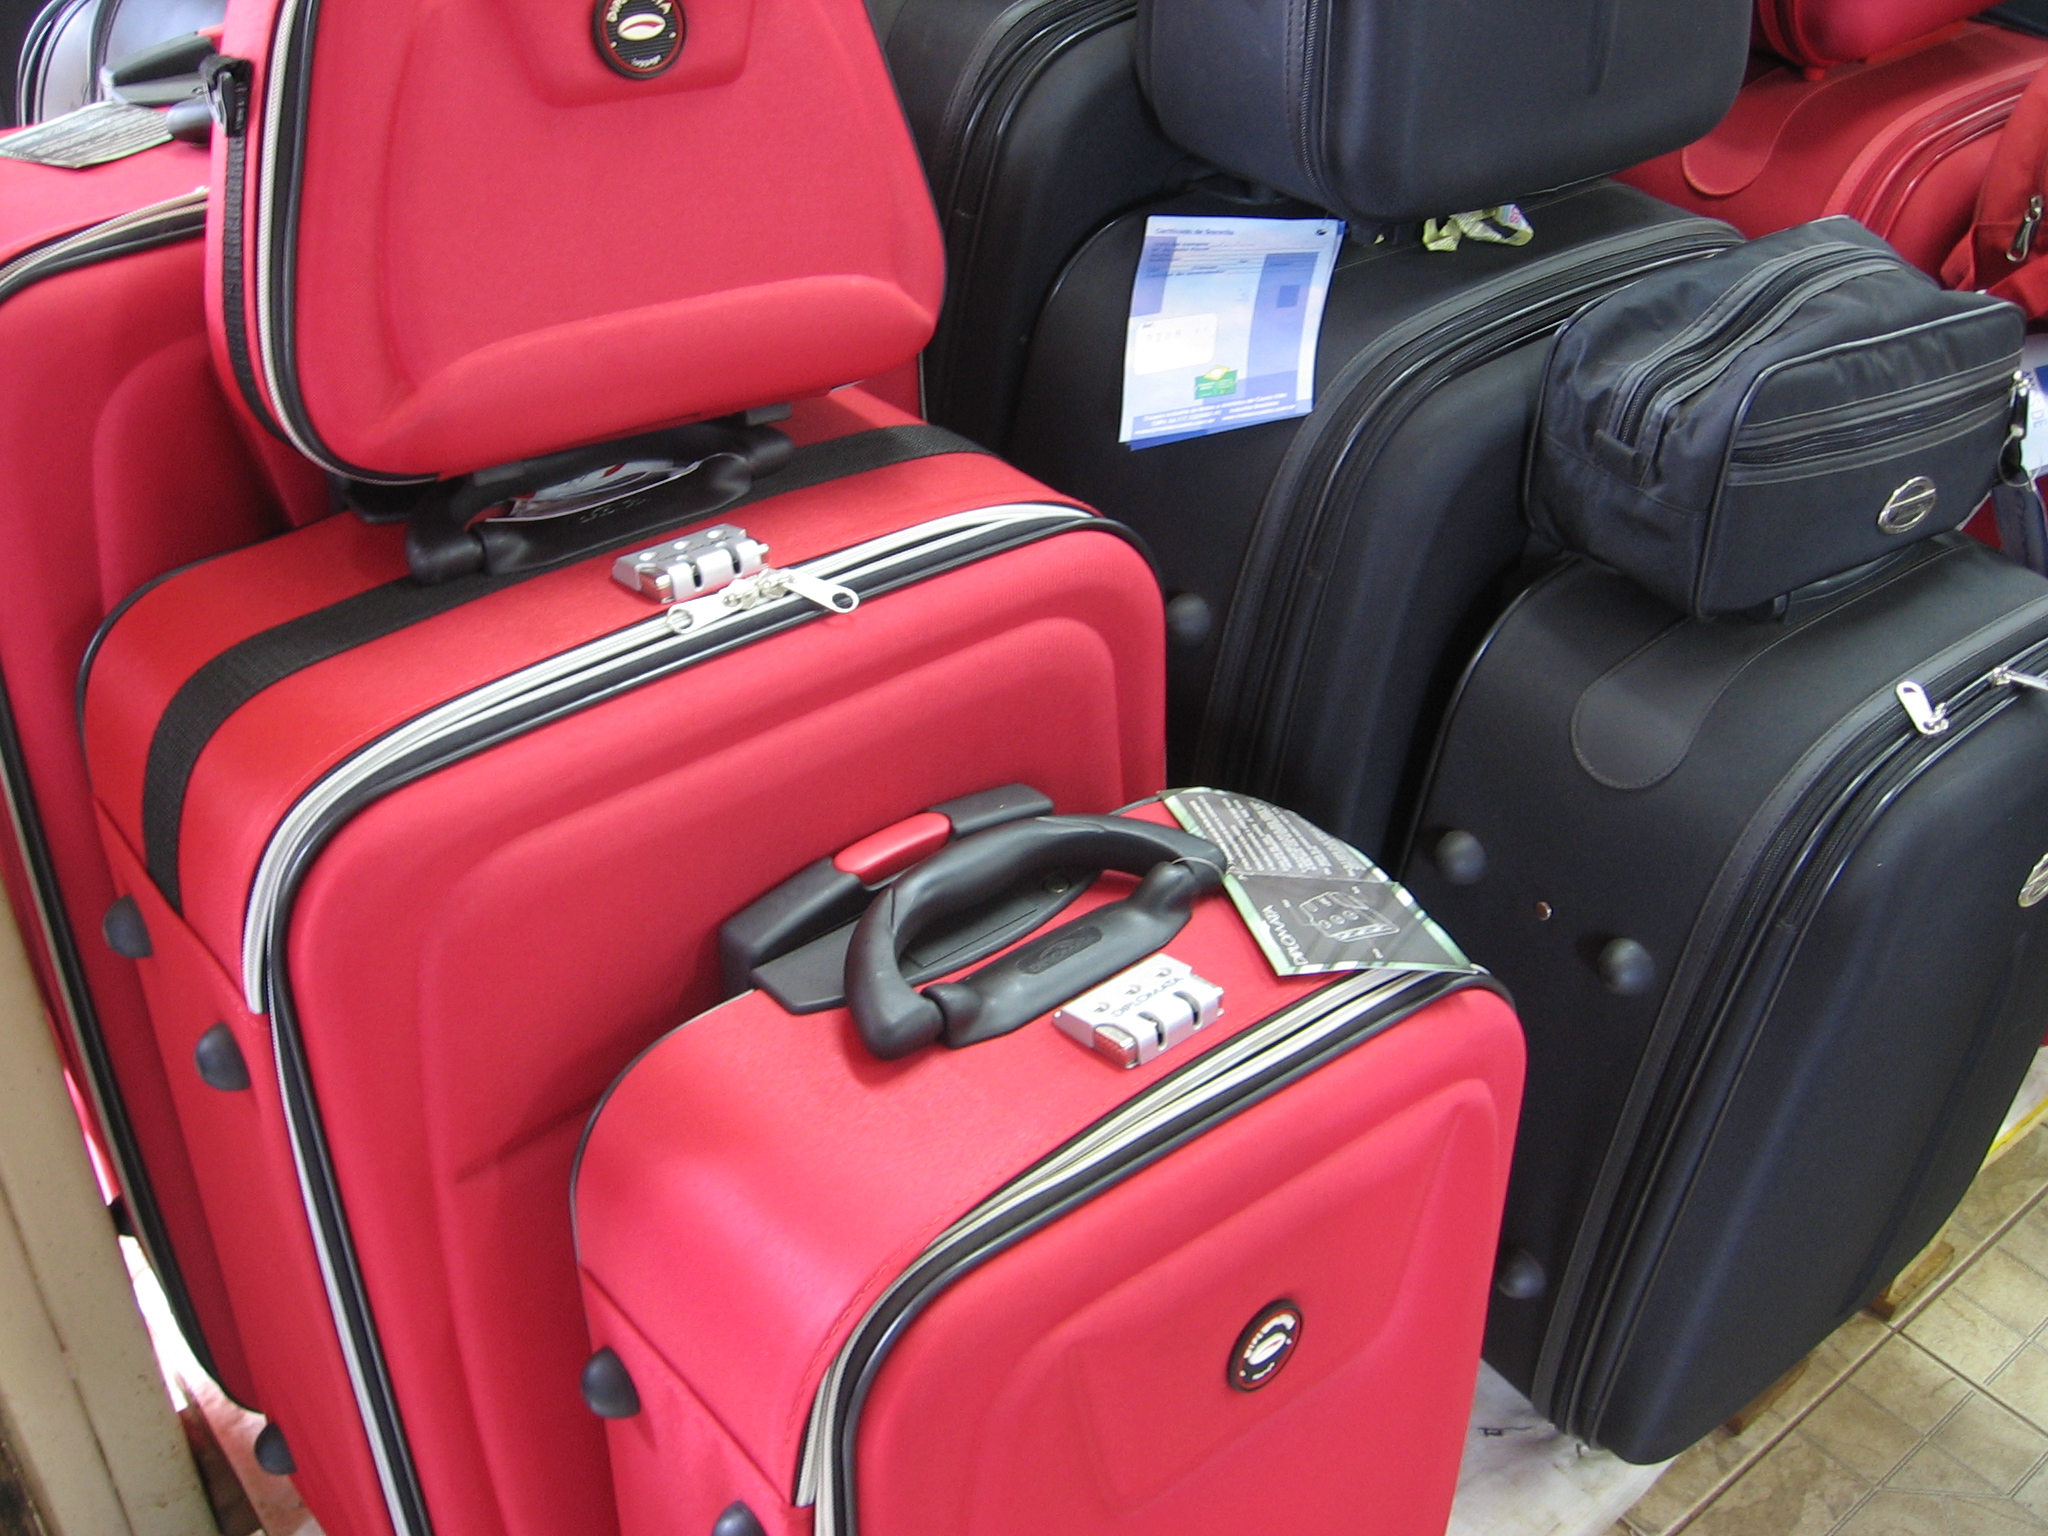 IATA and Airlines for America Launch Baggage Tracking Campaign